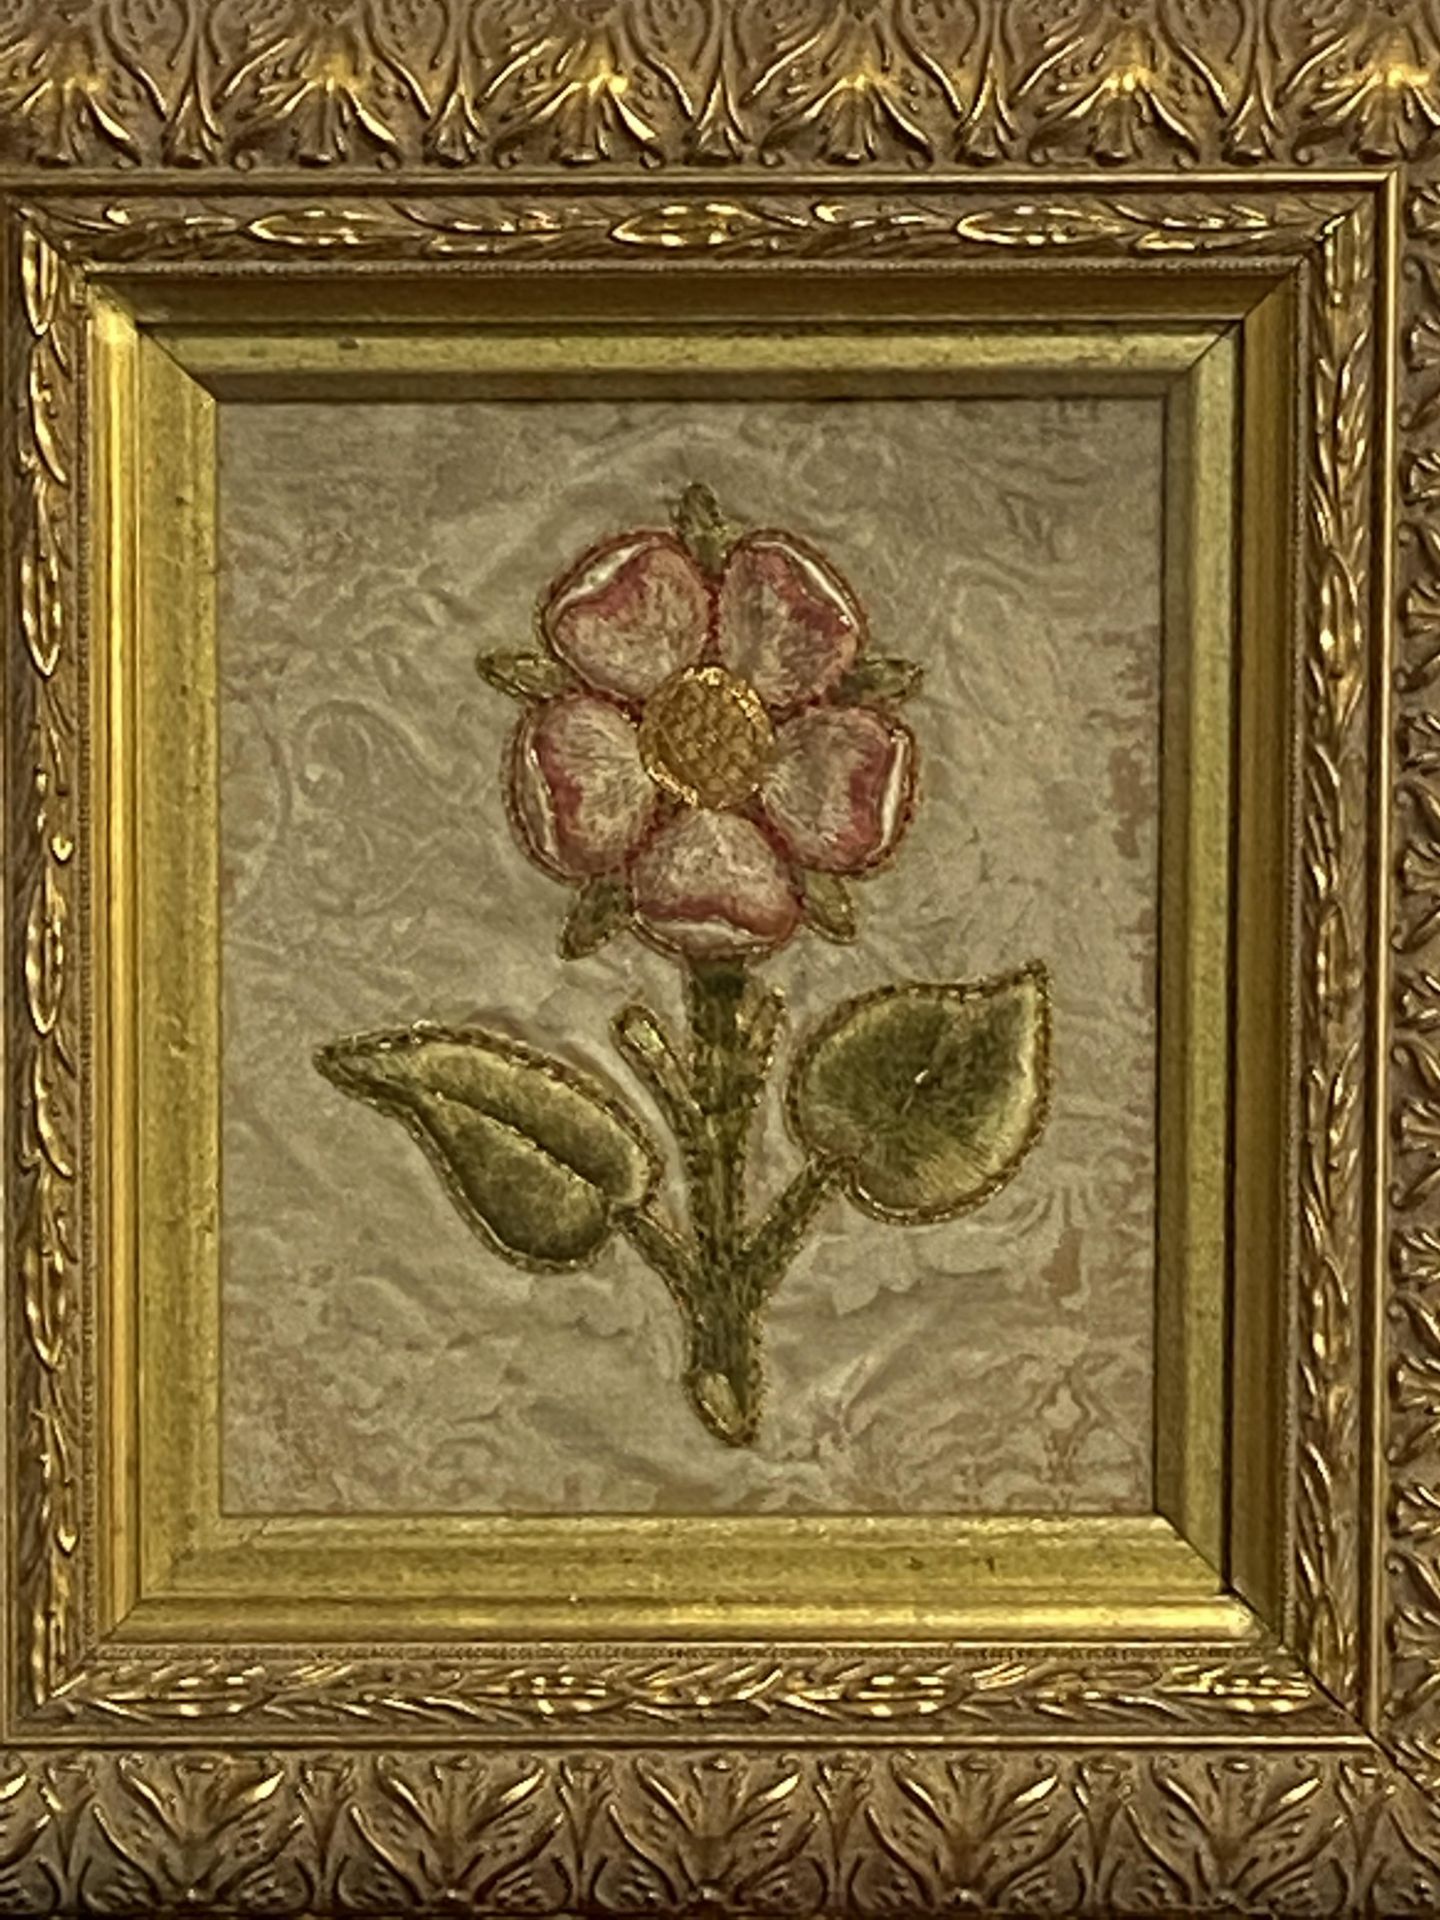 19th century silk embroidery - Image 4 of 4